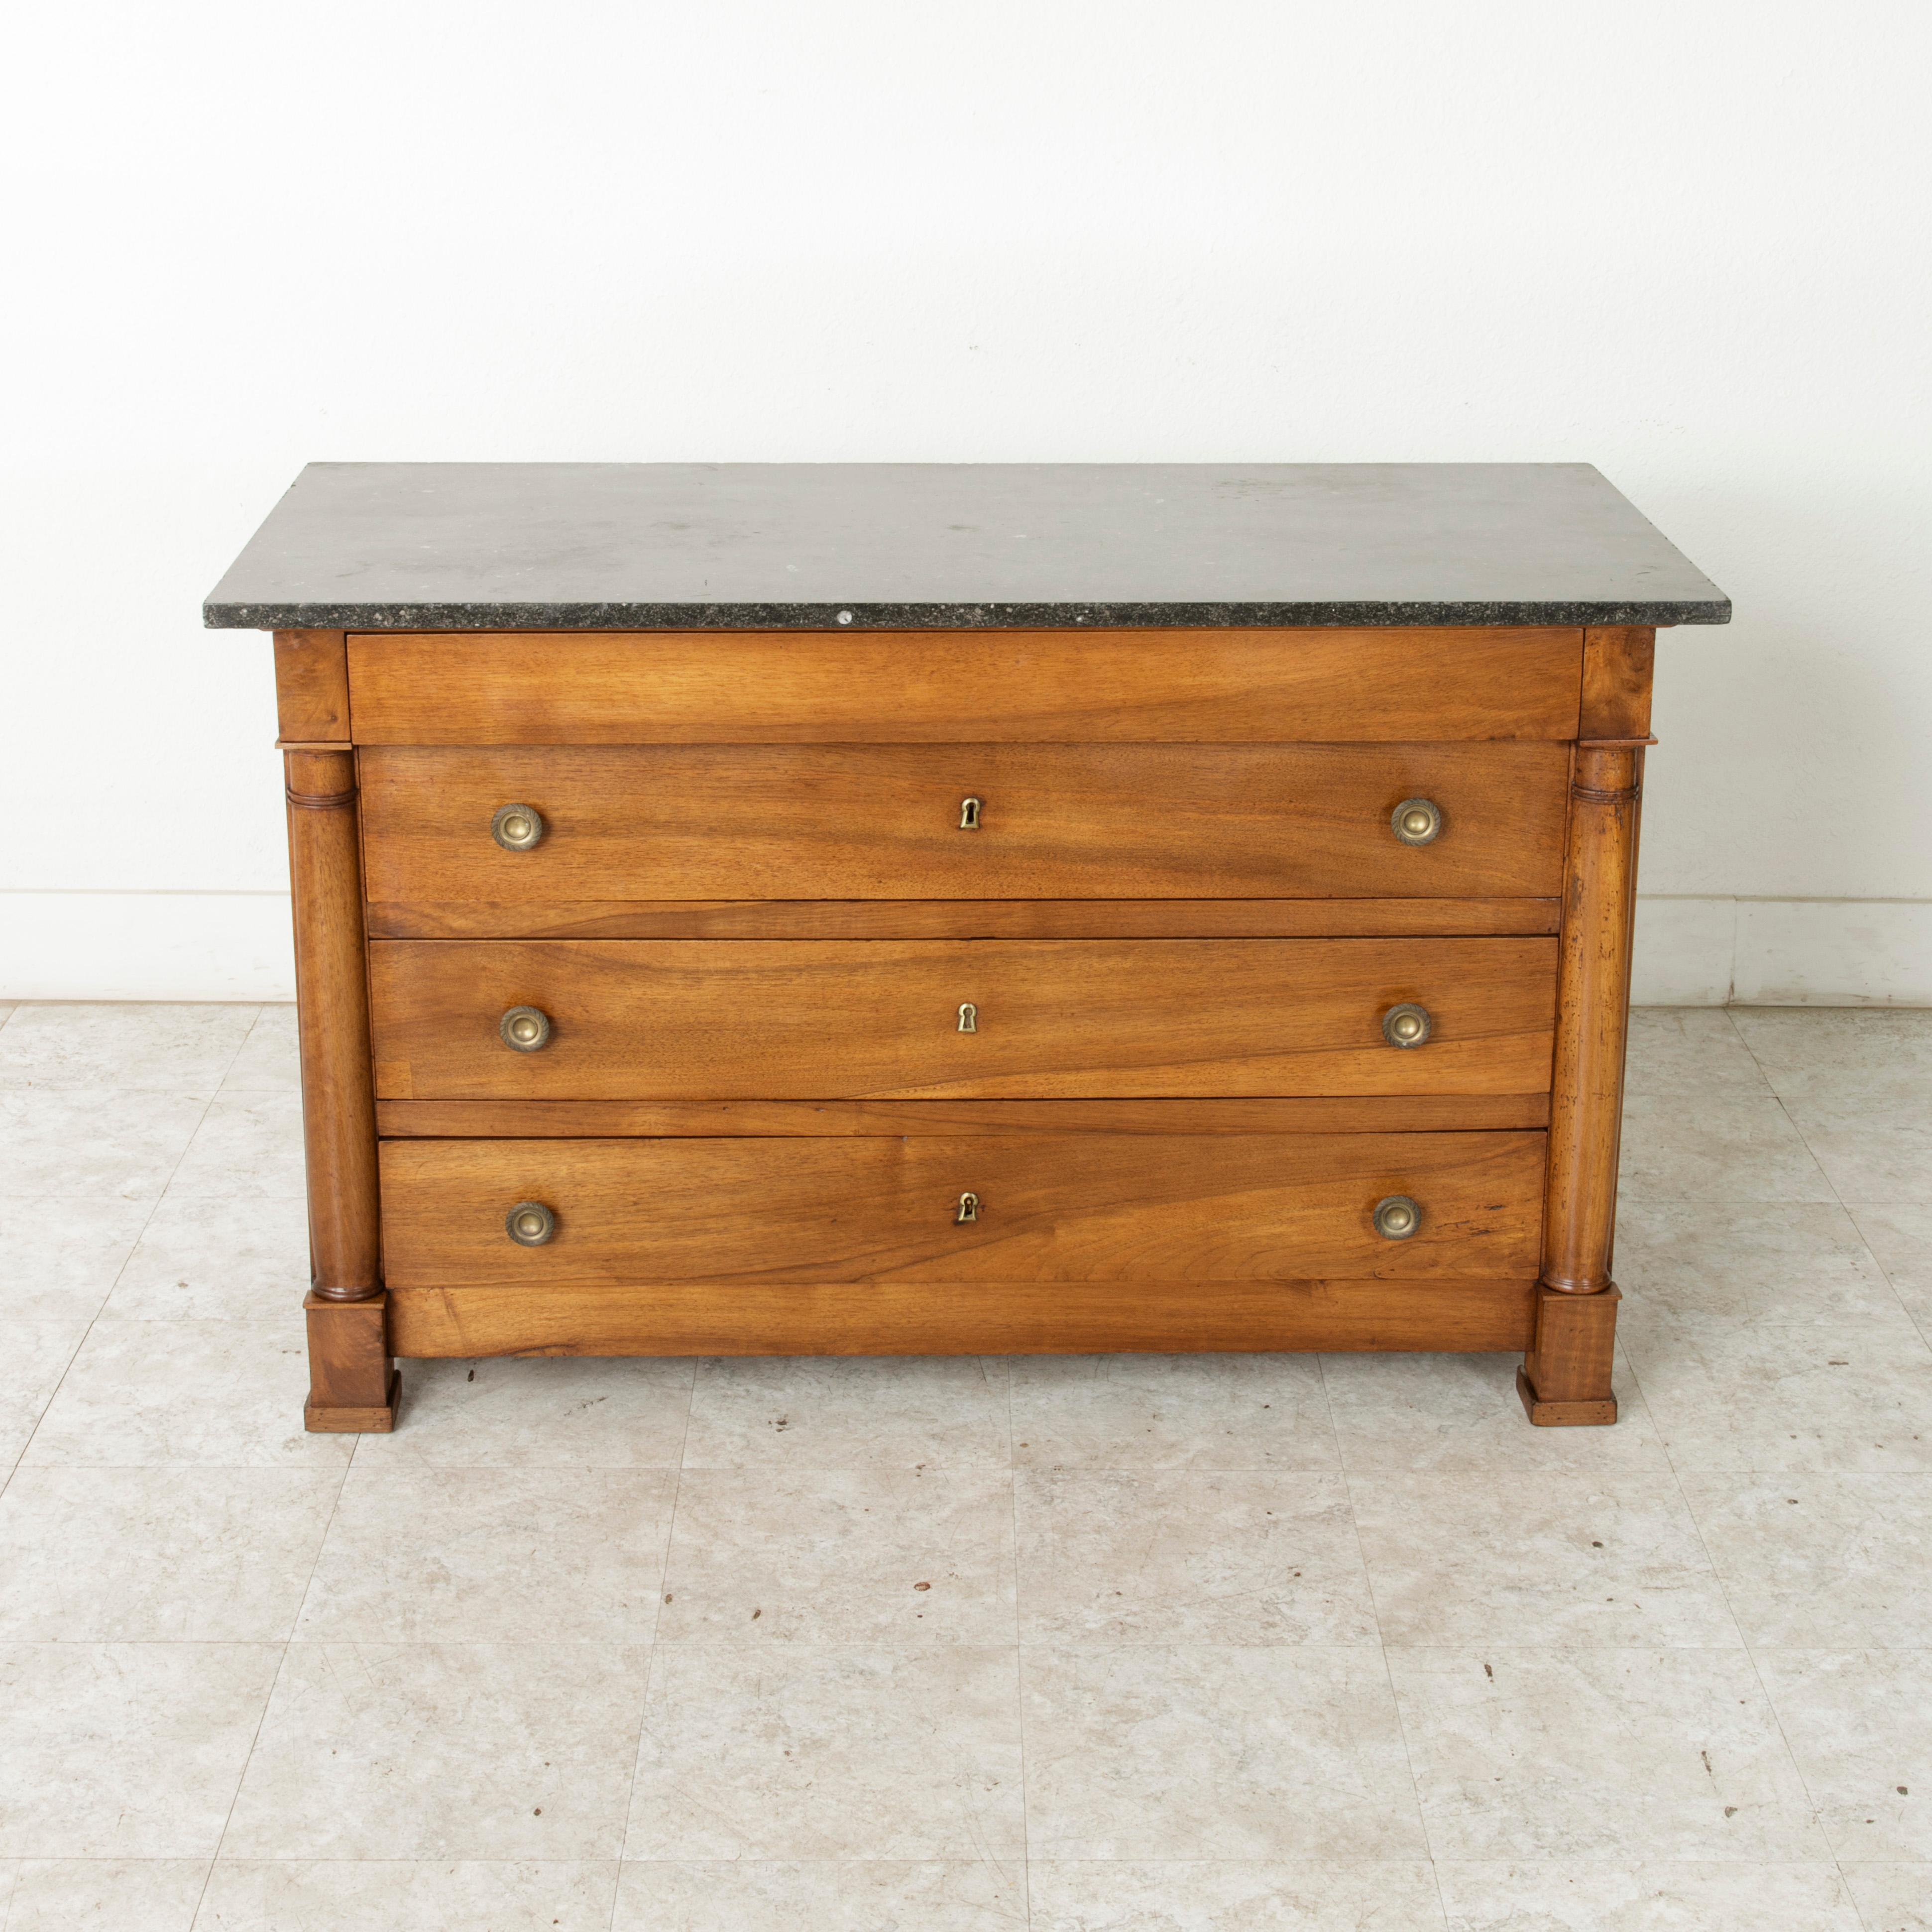 This late 19th century French Empire style walnut commode or chest features a solid black marble top. Its panelled sides are hand pegged and two classic half columns flank the front of the piece. Three drawers of dovetail construction are fitted